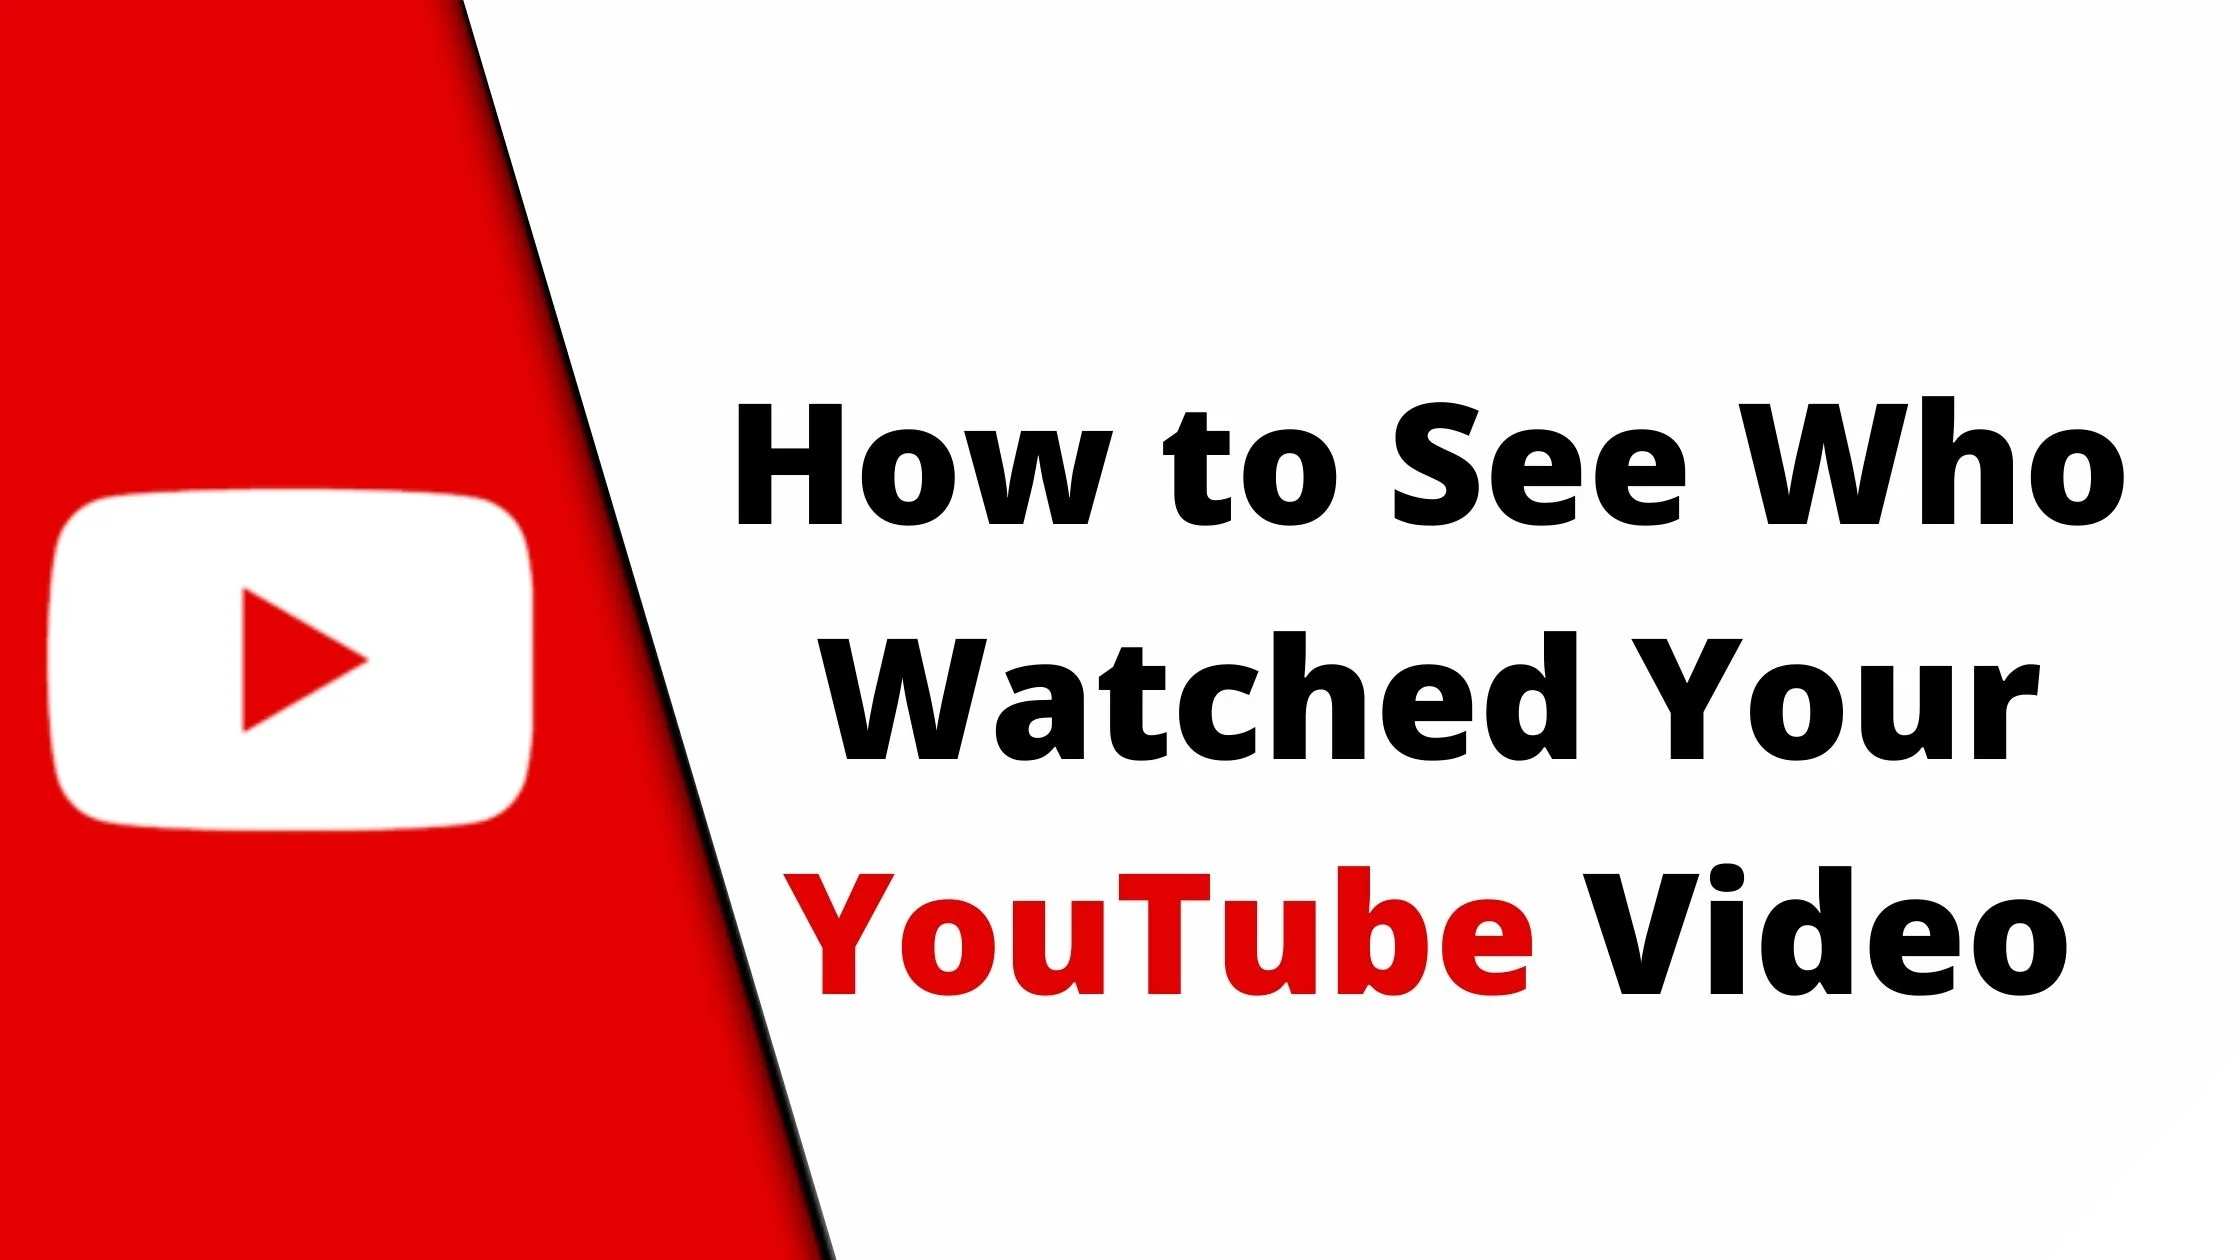 How to See Who Watched Your YouTube Video